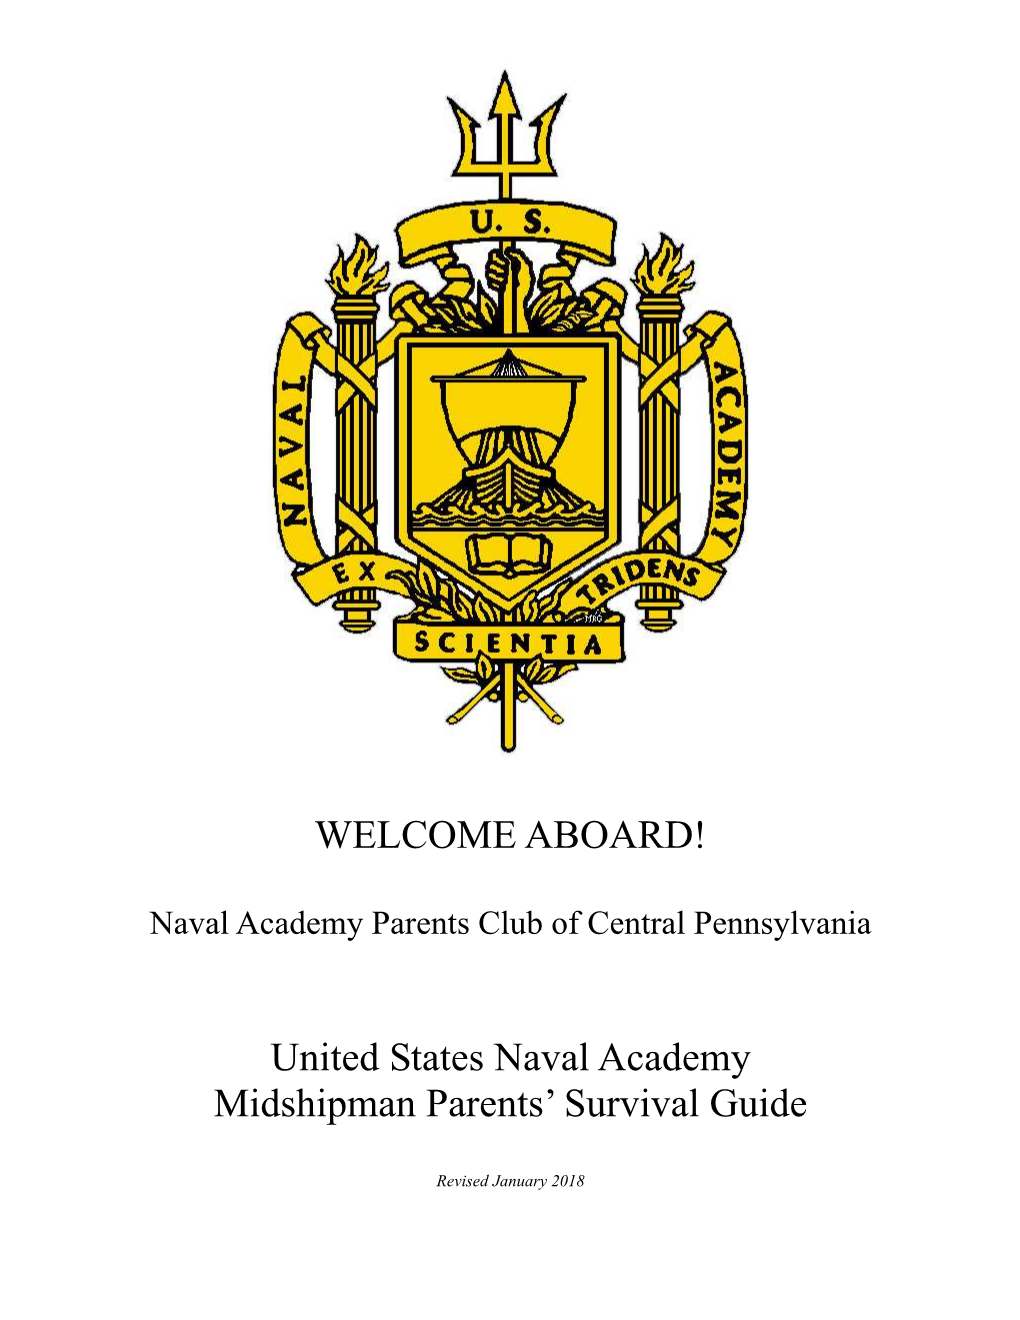 ABOARD! United States Naval Academy Midshipman Parents' Survival Guide